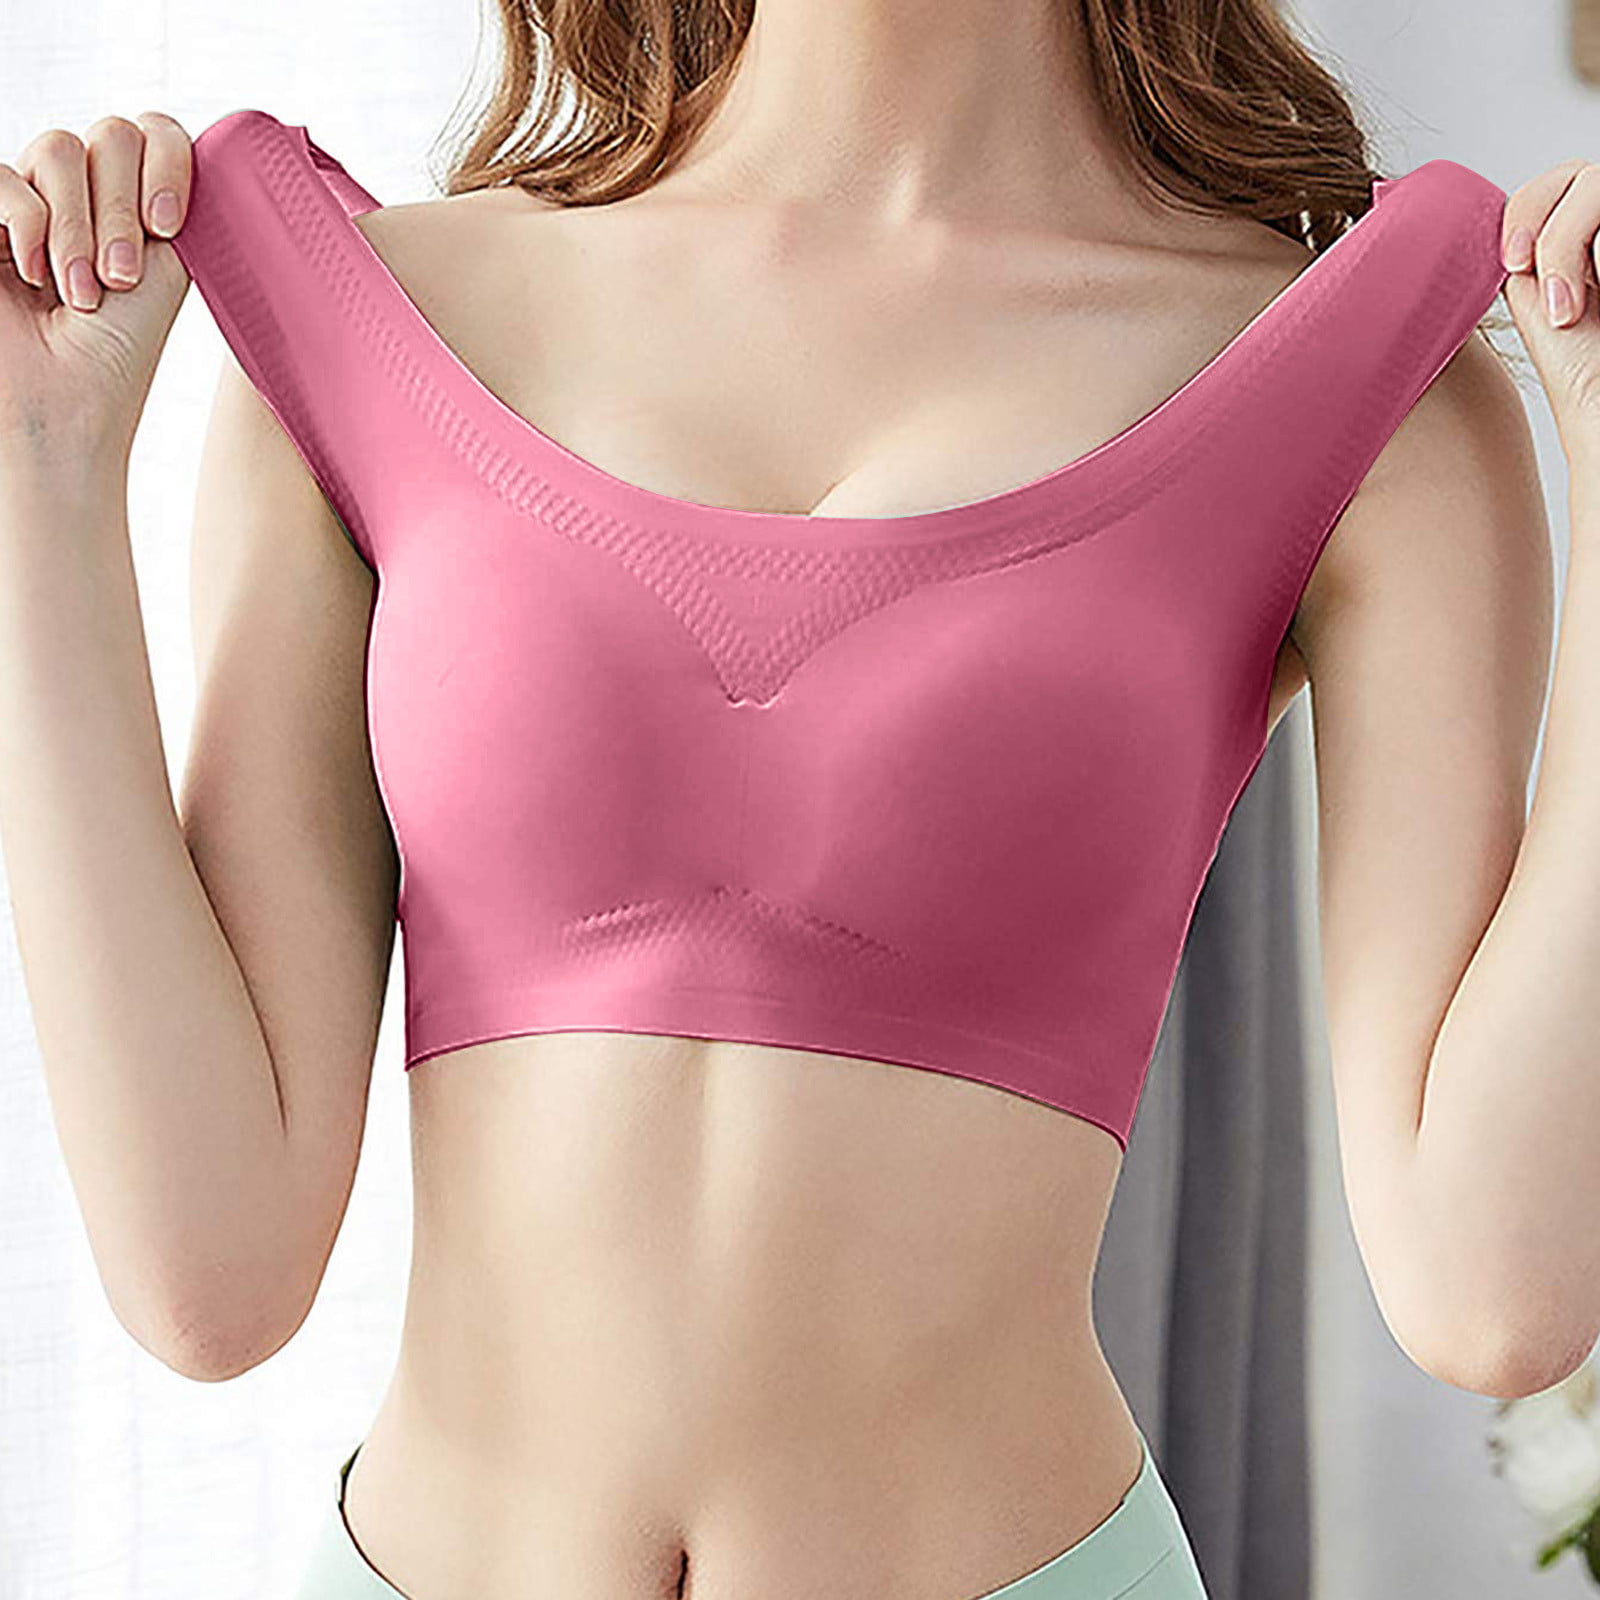 adviicd Strapless Bras for Women Push Up Women's X-Temp Wireless Bra with  Cooling Mesh, Full-Coverage, Convertible T-Shirt Bra Hot Pink 4X-Large